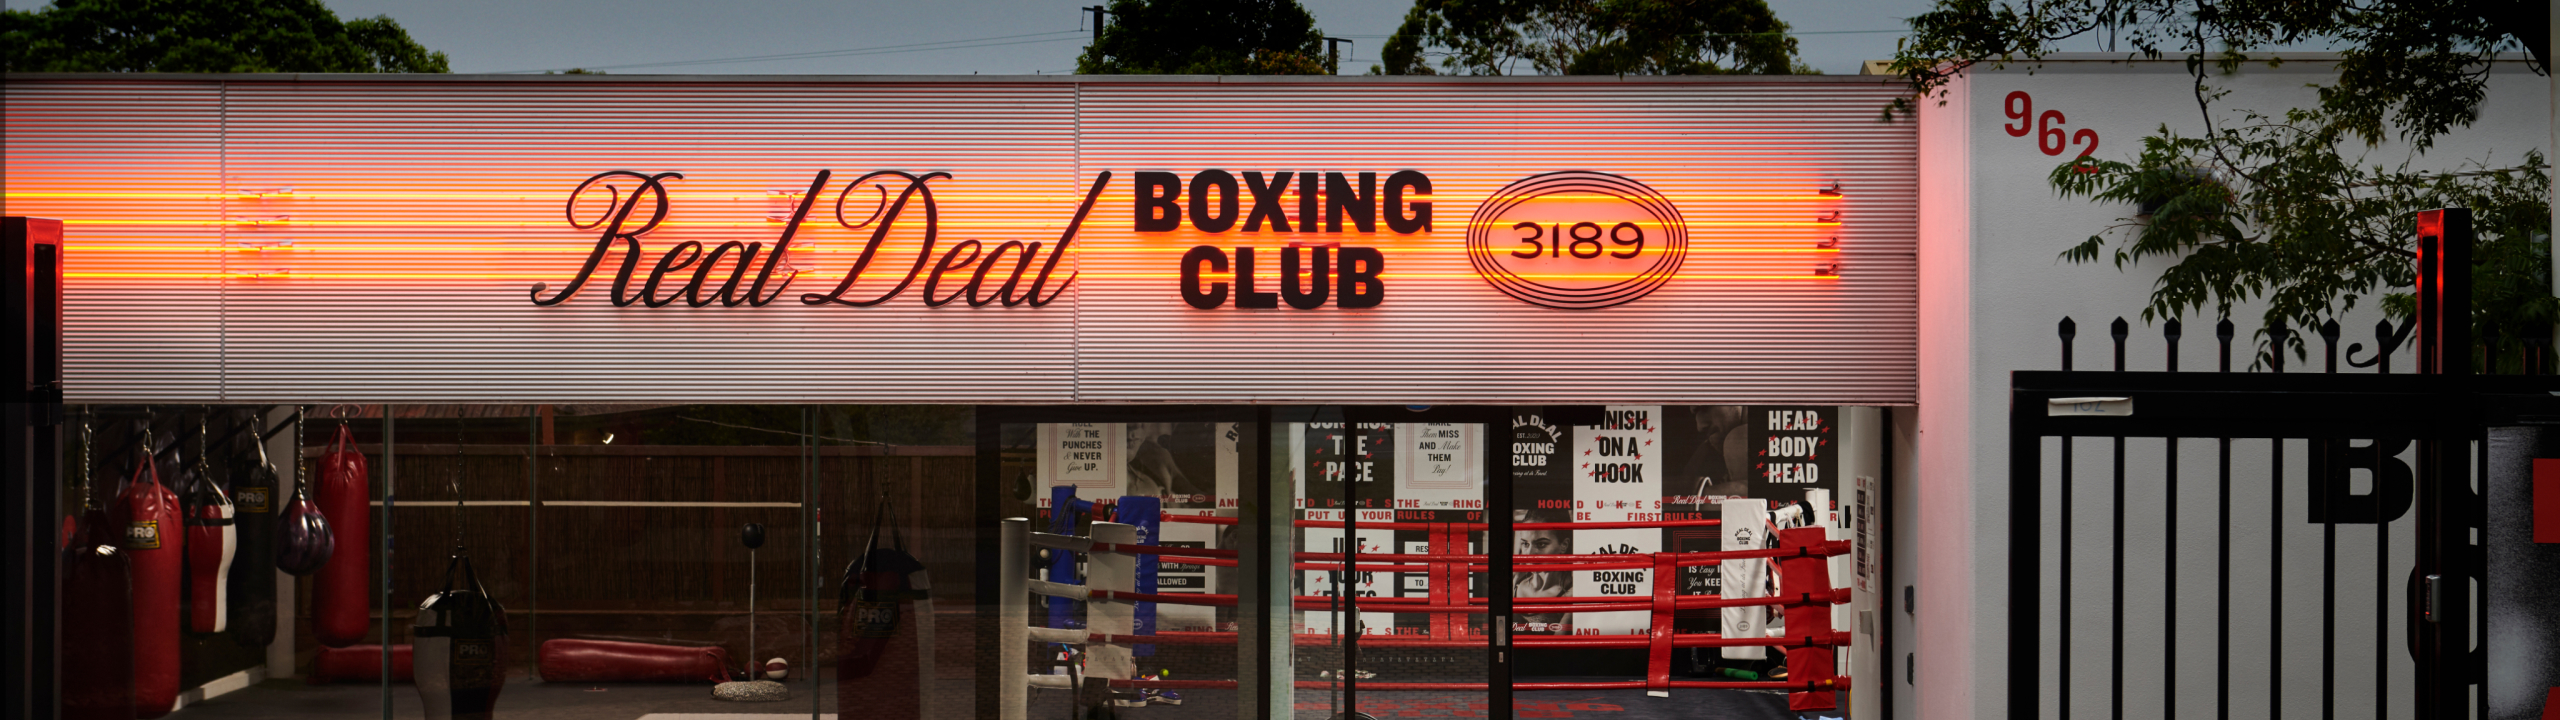 Real Deal Boxing Club